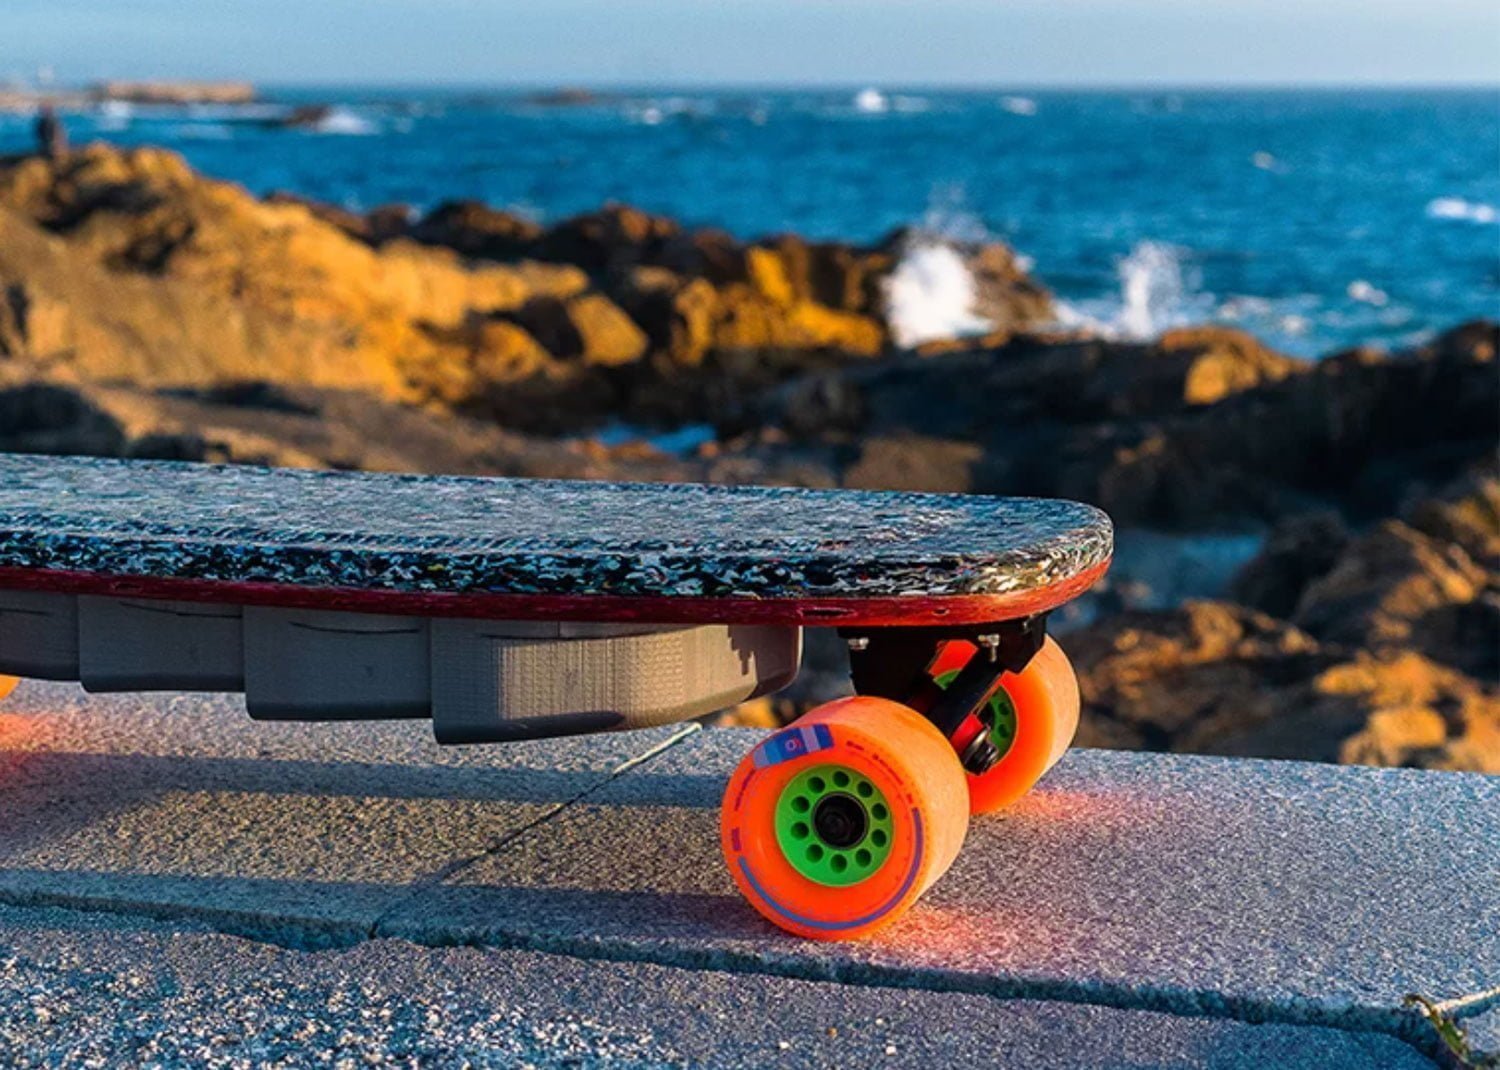 These skateboards and sunglasses are cleaning up the oceans